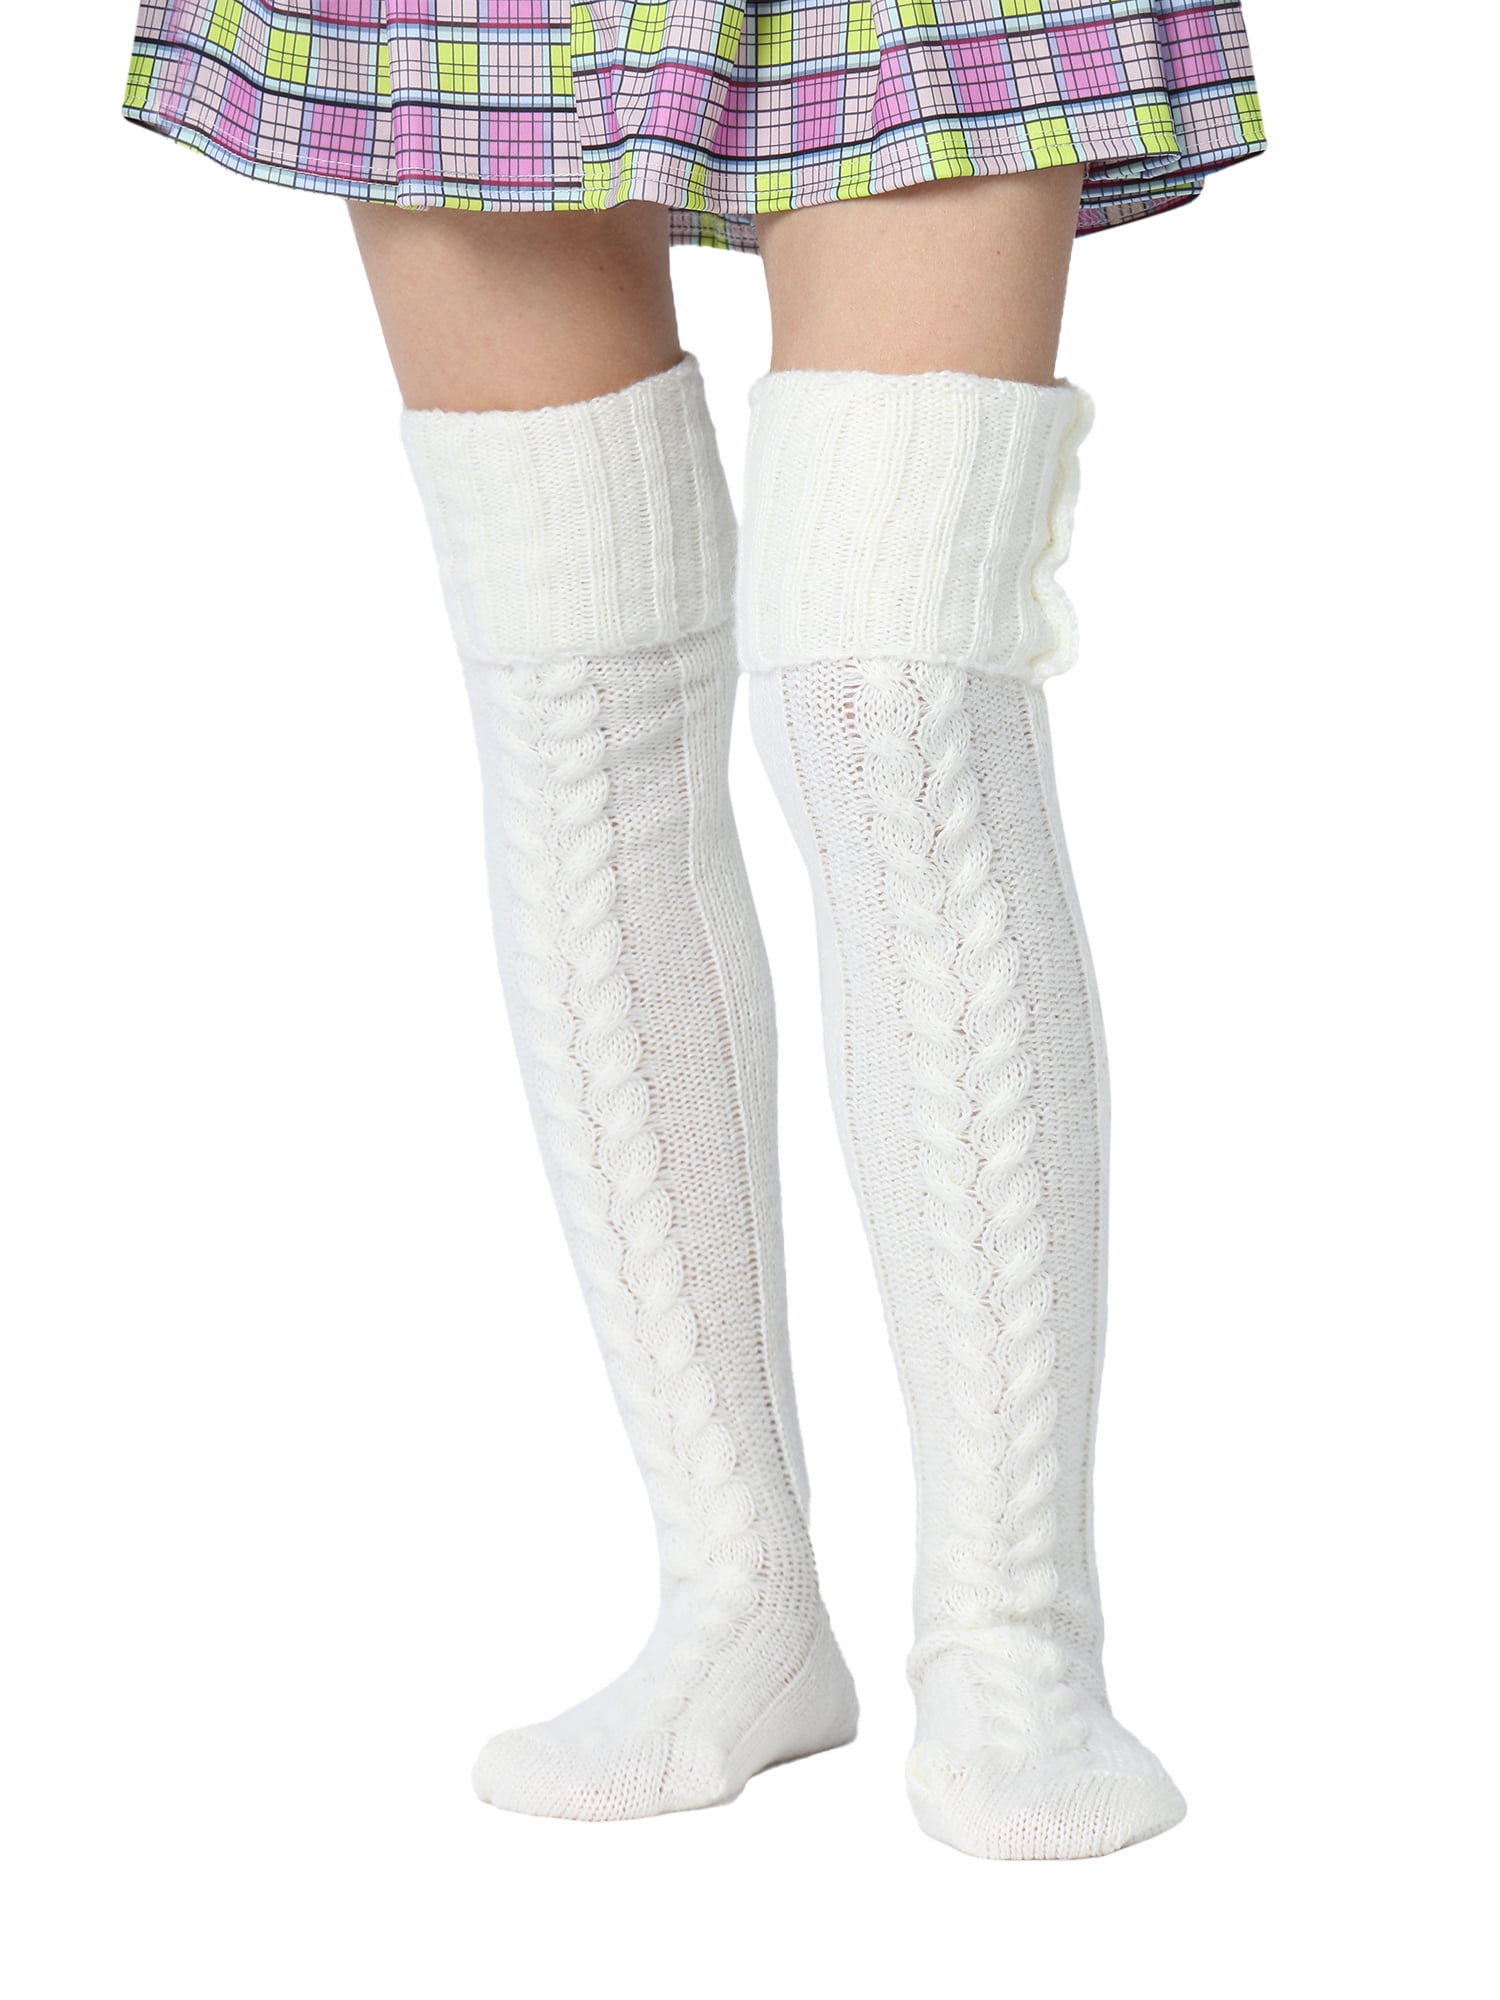 Knitted White Thigh High Leg Warmers,Knitted Black Leg Warmers,Warm Socks In Autumn And Winter,Knitting Wool Leg Warmers,Knitted Knee Socks.